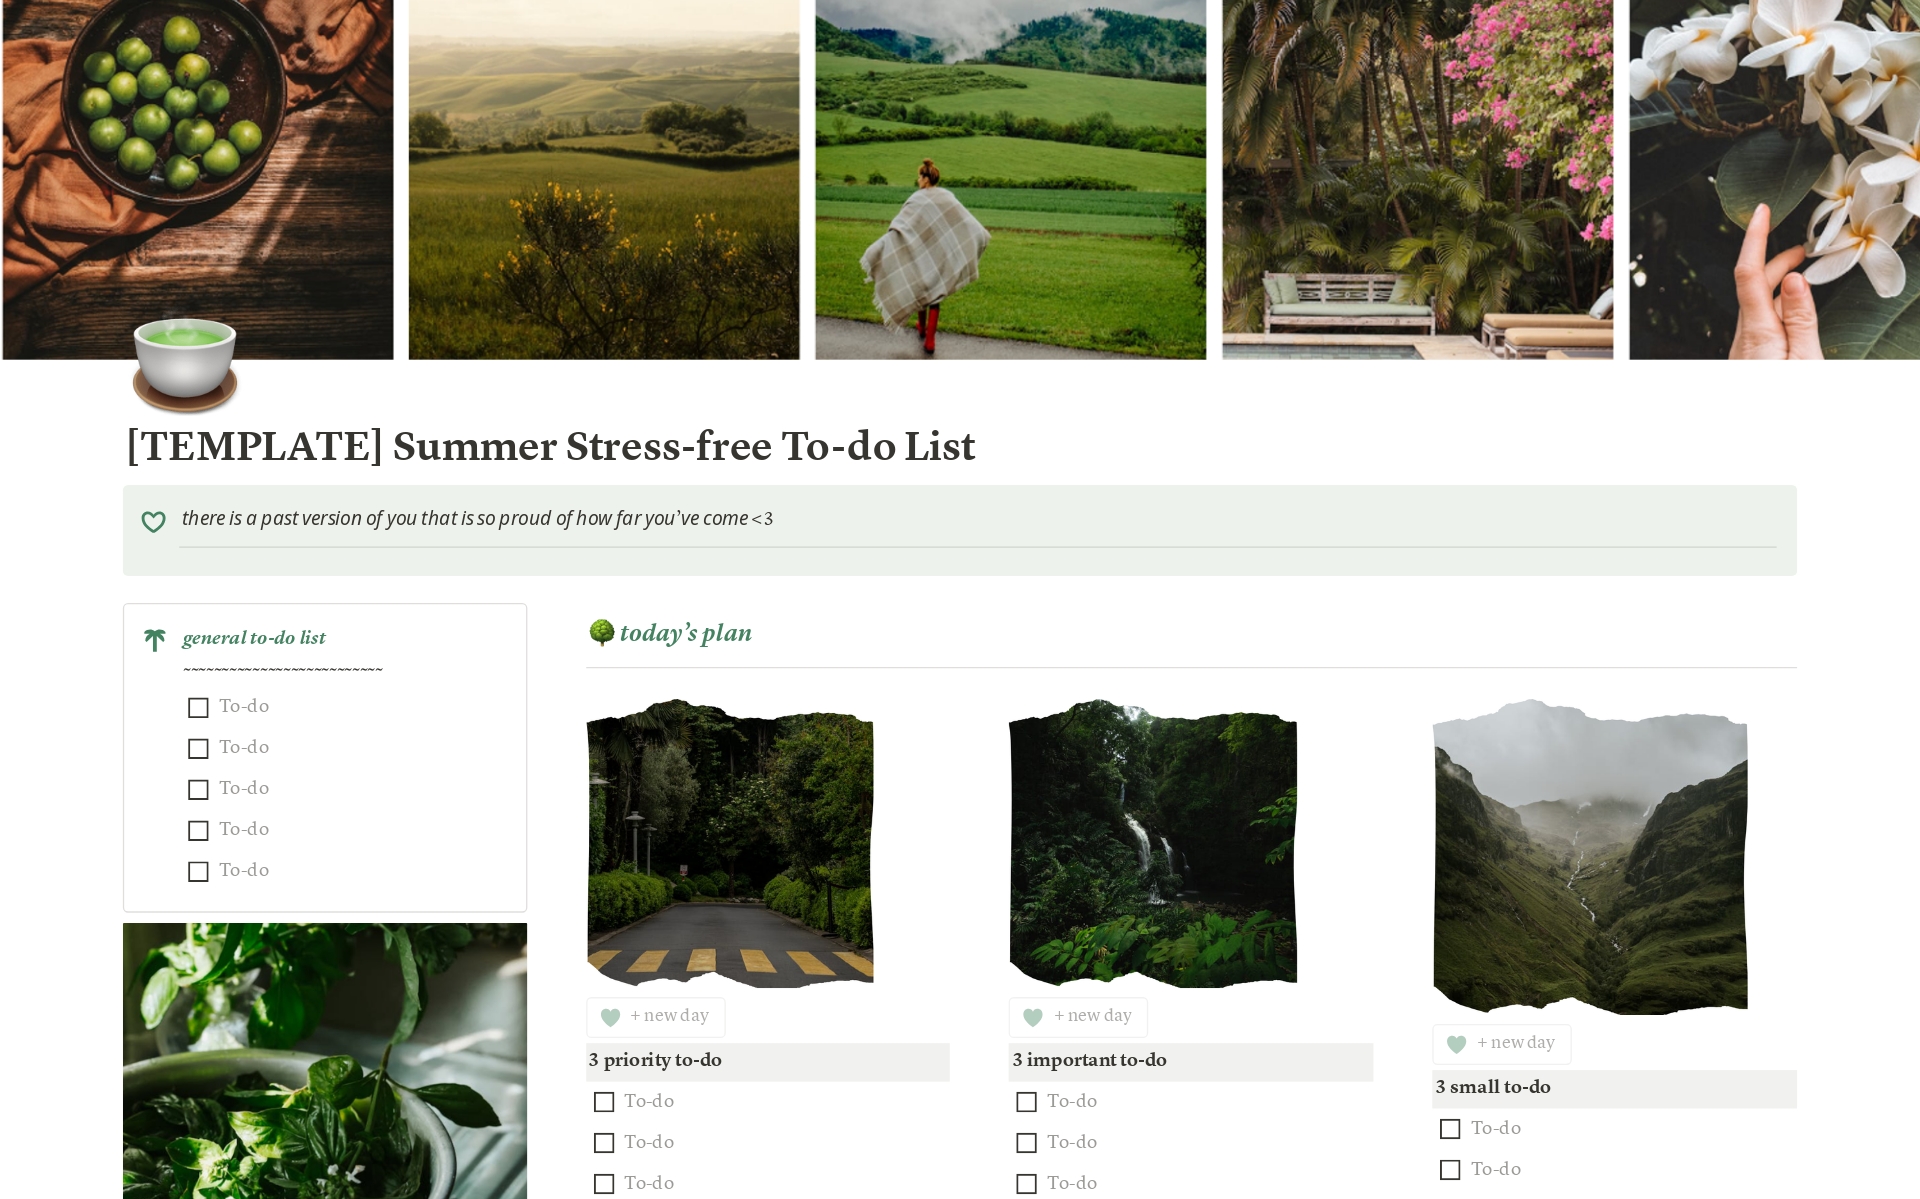 🌿 Summer Stress-free To-do List Notion template: your ultimate companion for seamless task management and self-care routine.

Use the potent "3-3-3 Method": a strategic framework designed to amplify focus and reduce planning stress! 😍